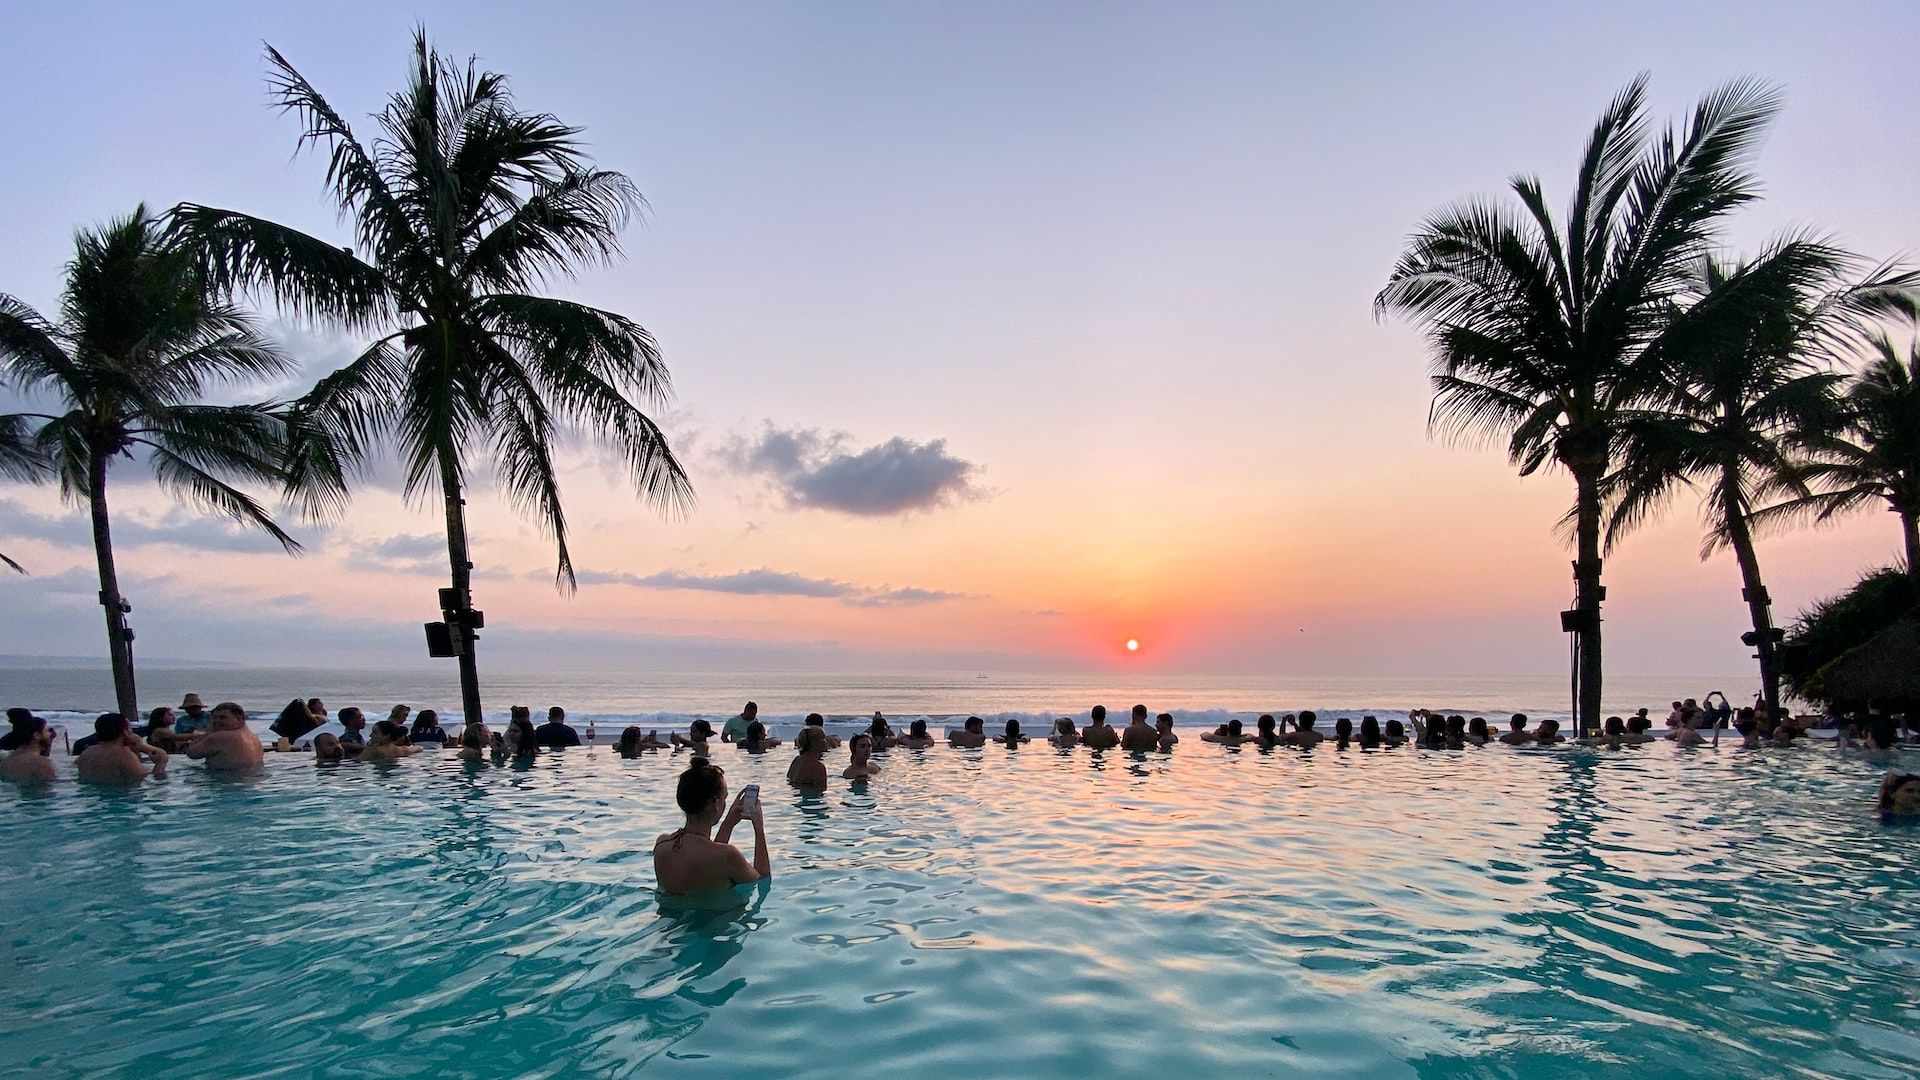 Sunset from the pool at Potato Head Beach Club, Bali